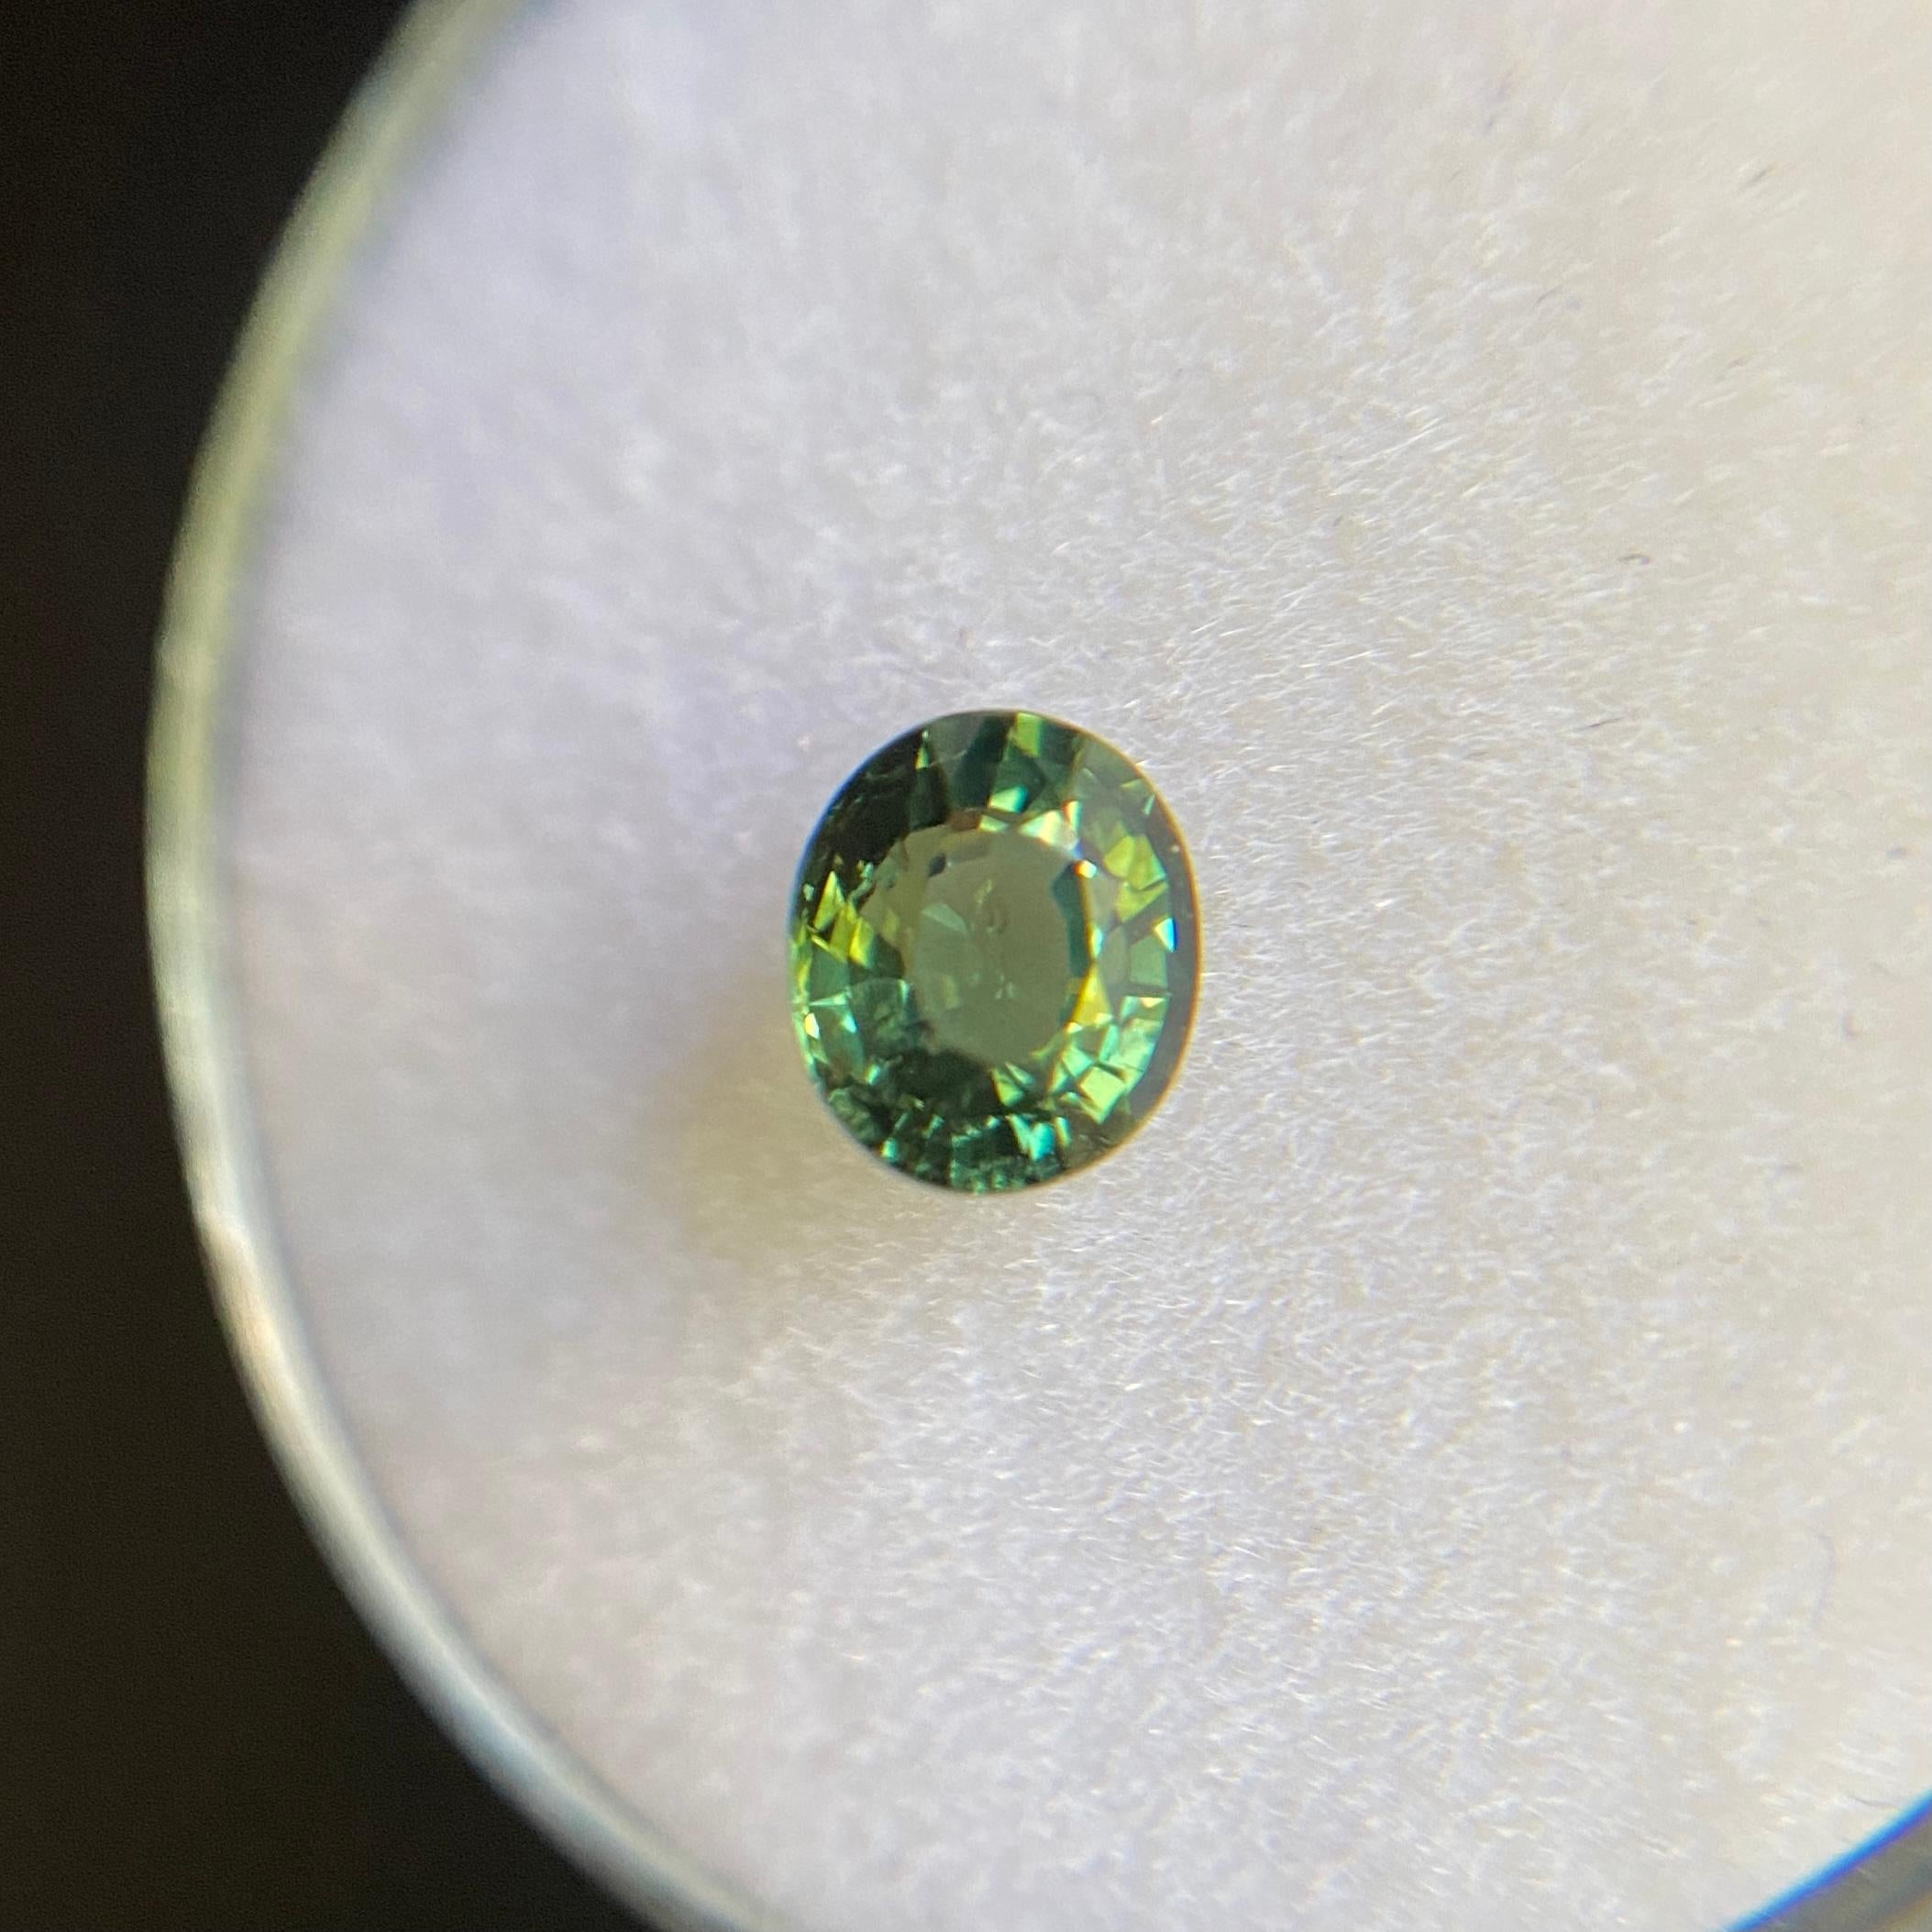 Natural Untreated Green Sapphire Gemstone.

0.71 carat stone with a beautiful green colour and good clarity, a clean stone with only some small natural inclusions visible when looking closely. Also has an excellent cut and polish to show great shine